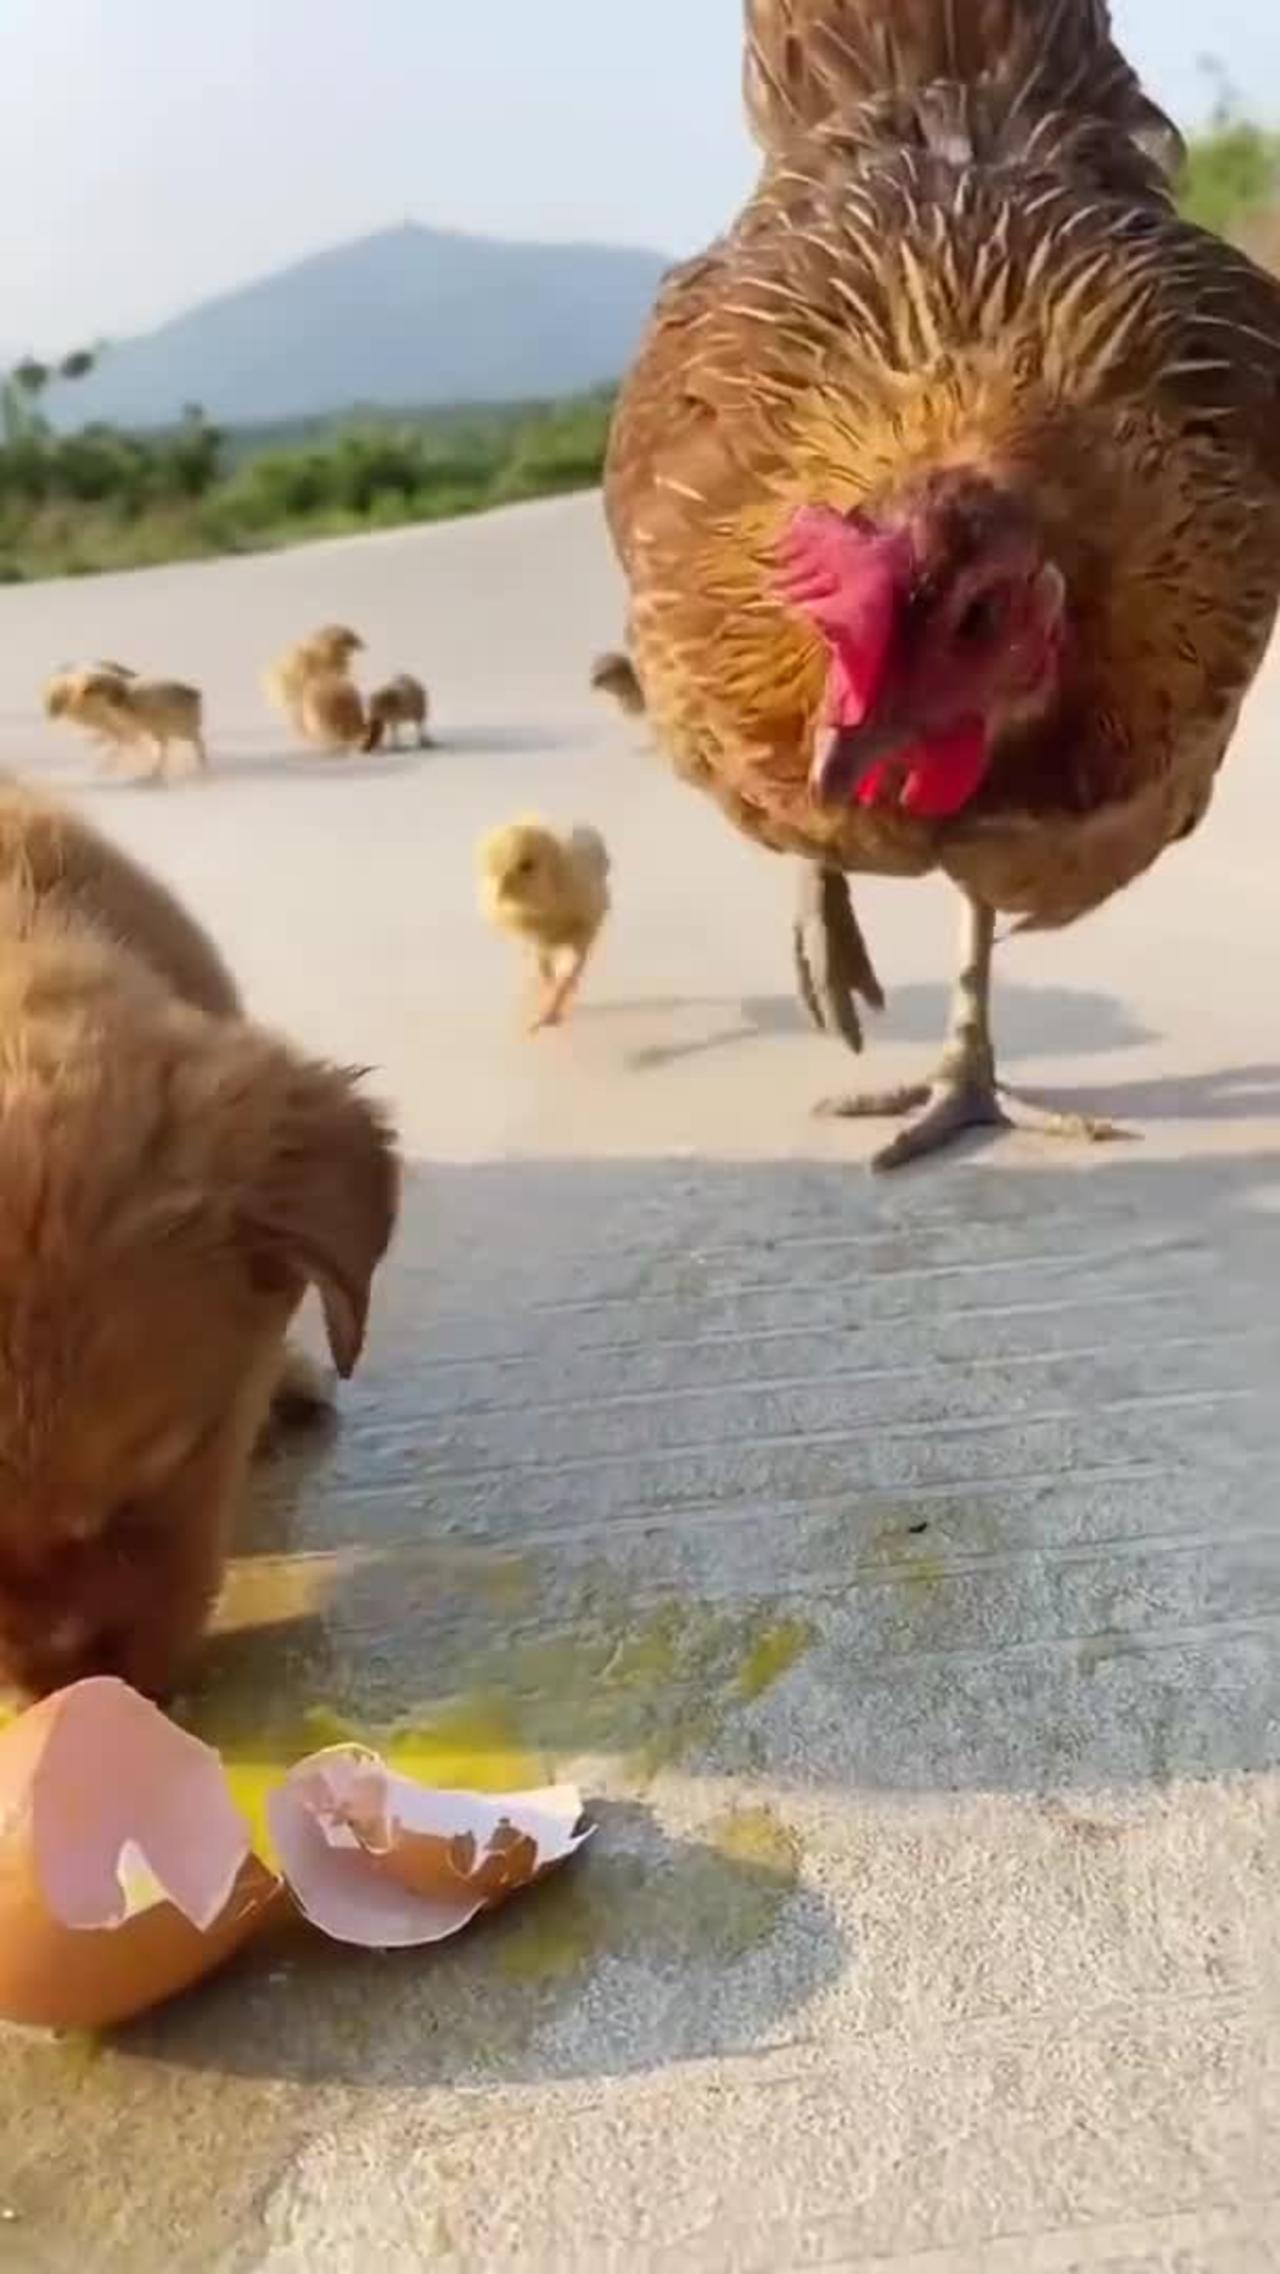 Chicken 🐔 attacking puppy for eating its egg